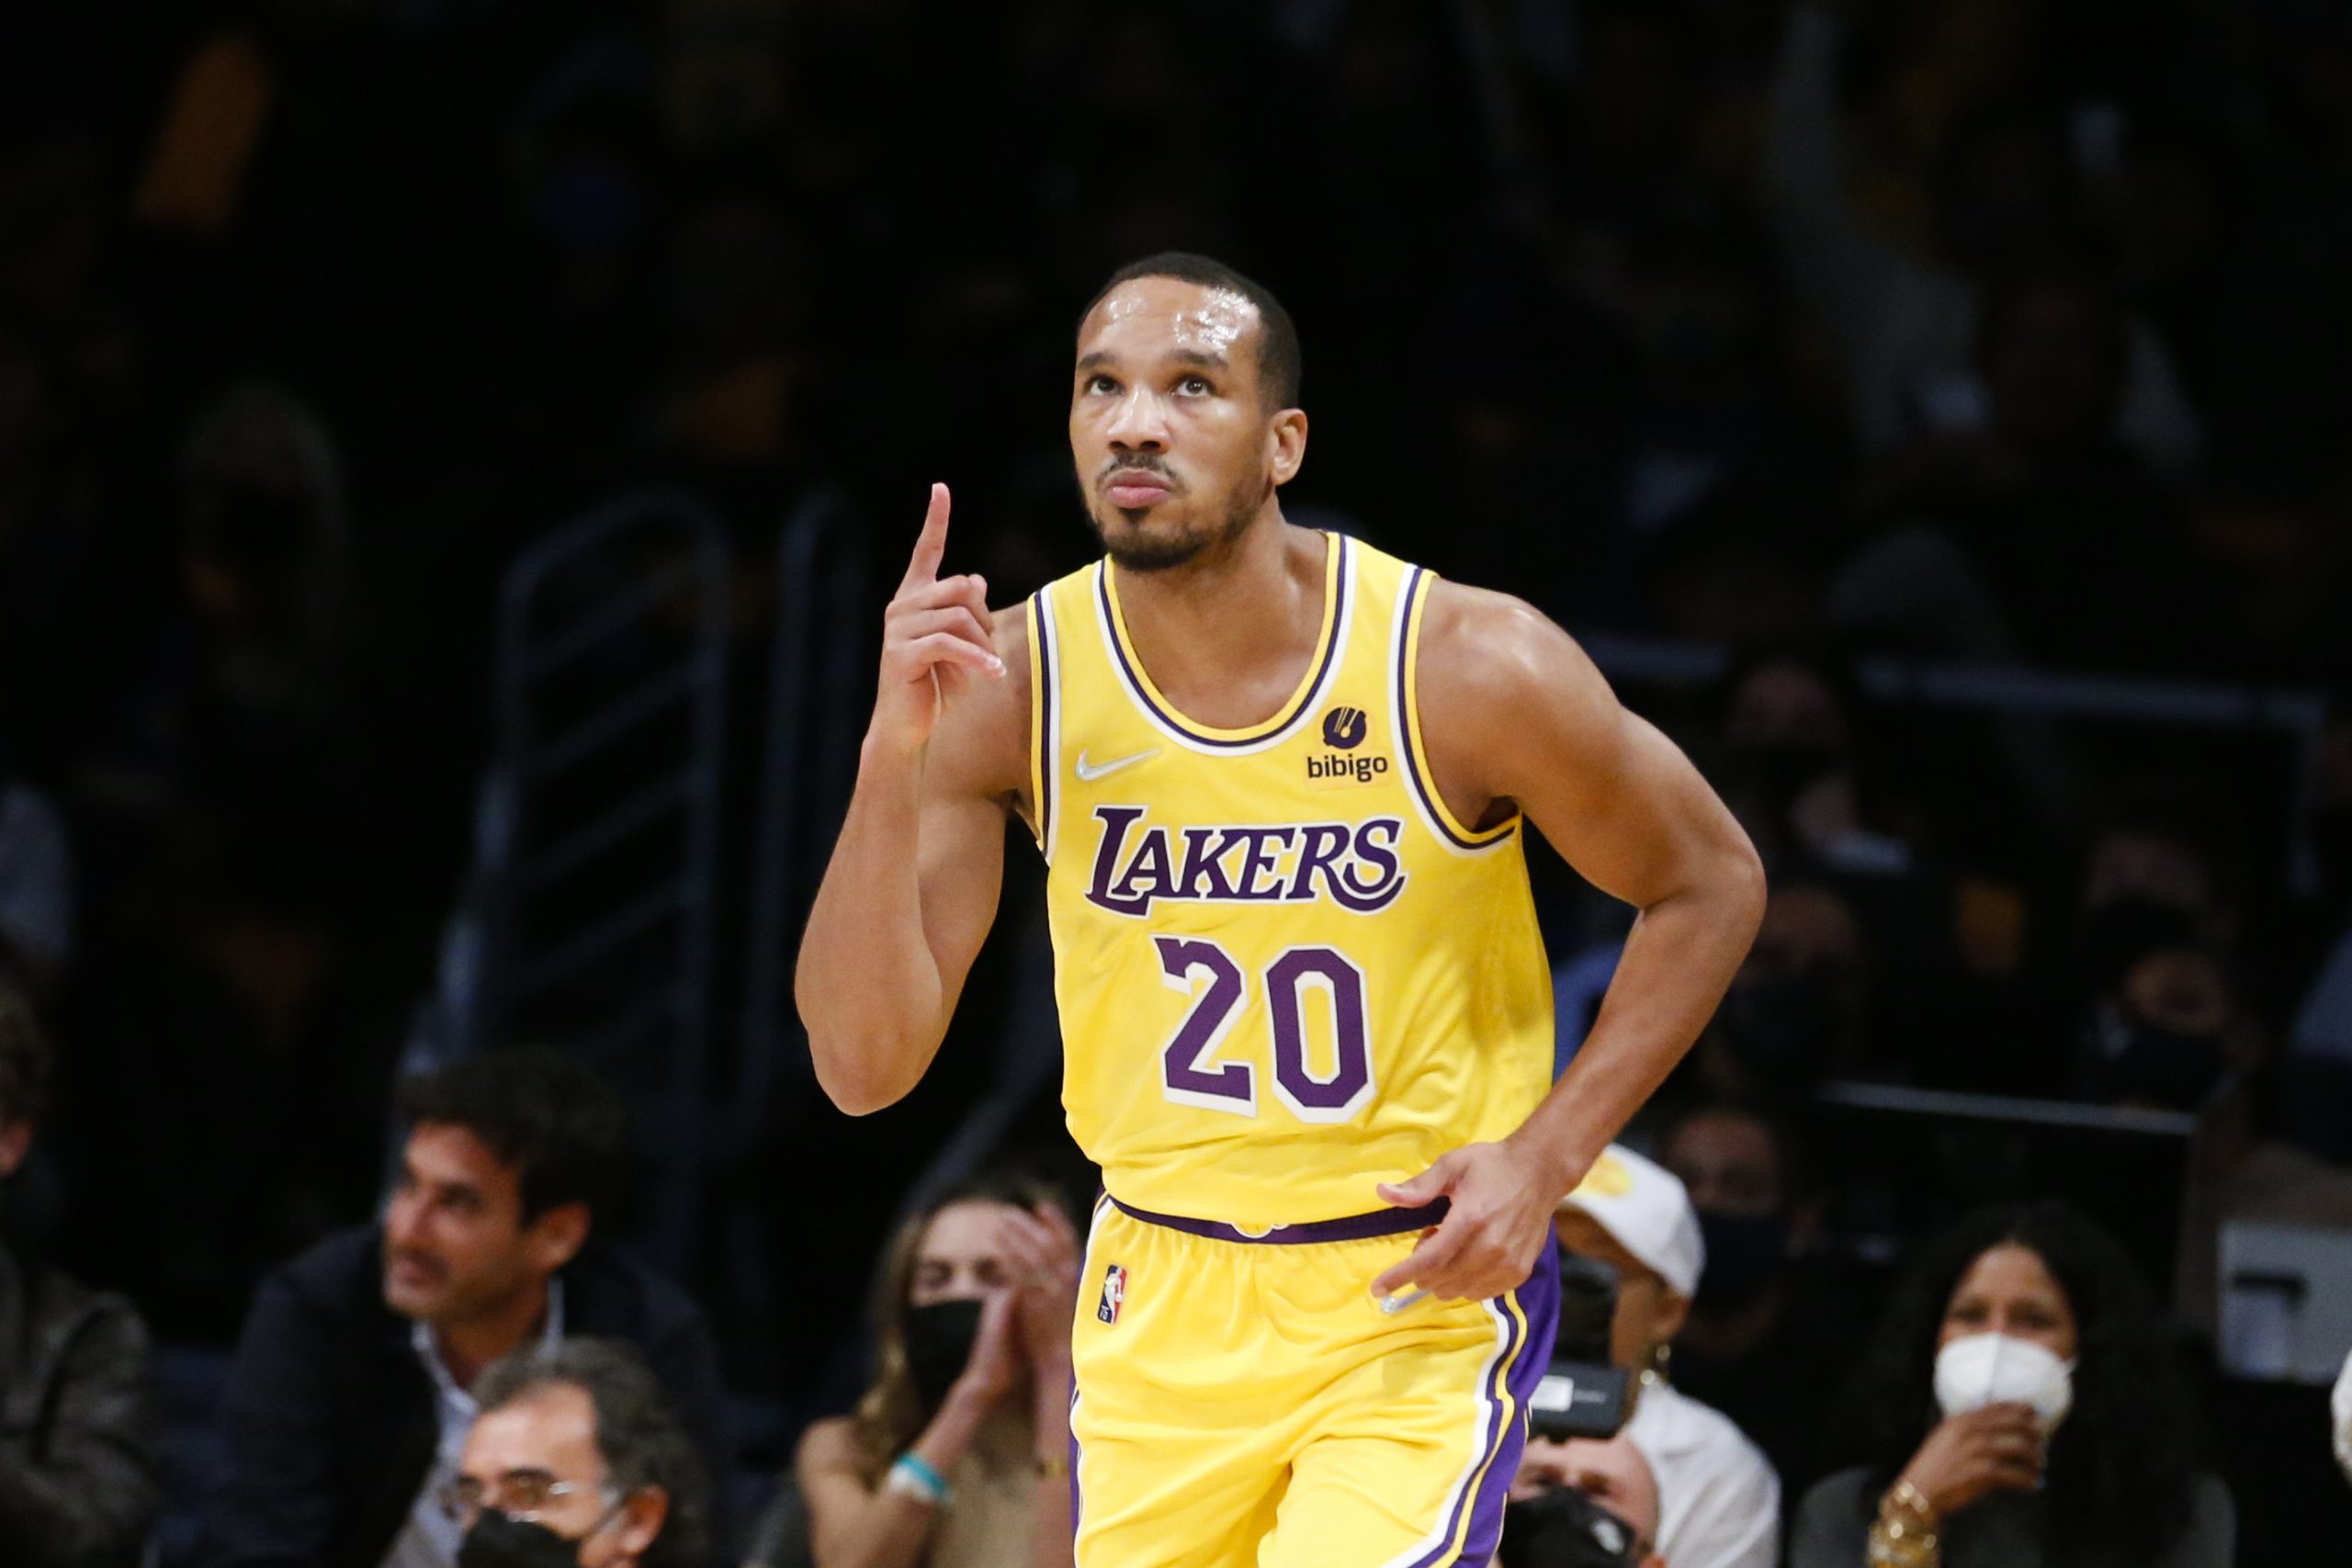 Los Angeles Lakers guard Avery Bradley (20) gestures after scoring a 3-pointer against the Golden State Warriors during the second half of an NBA basketball game in Los Angeles, Tuesday, Oct. 19, 2021. The Warriors won 121-114. (AP Photo/Ringo H.W. Chiu)